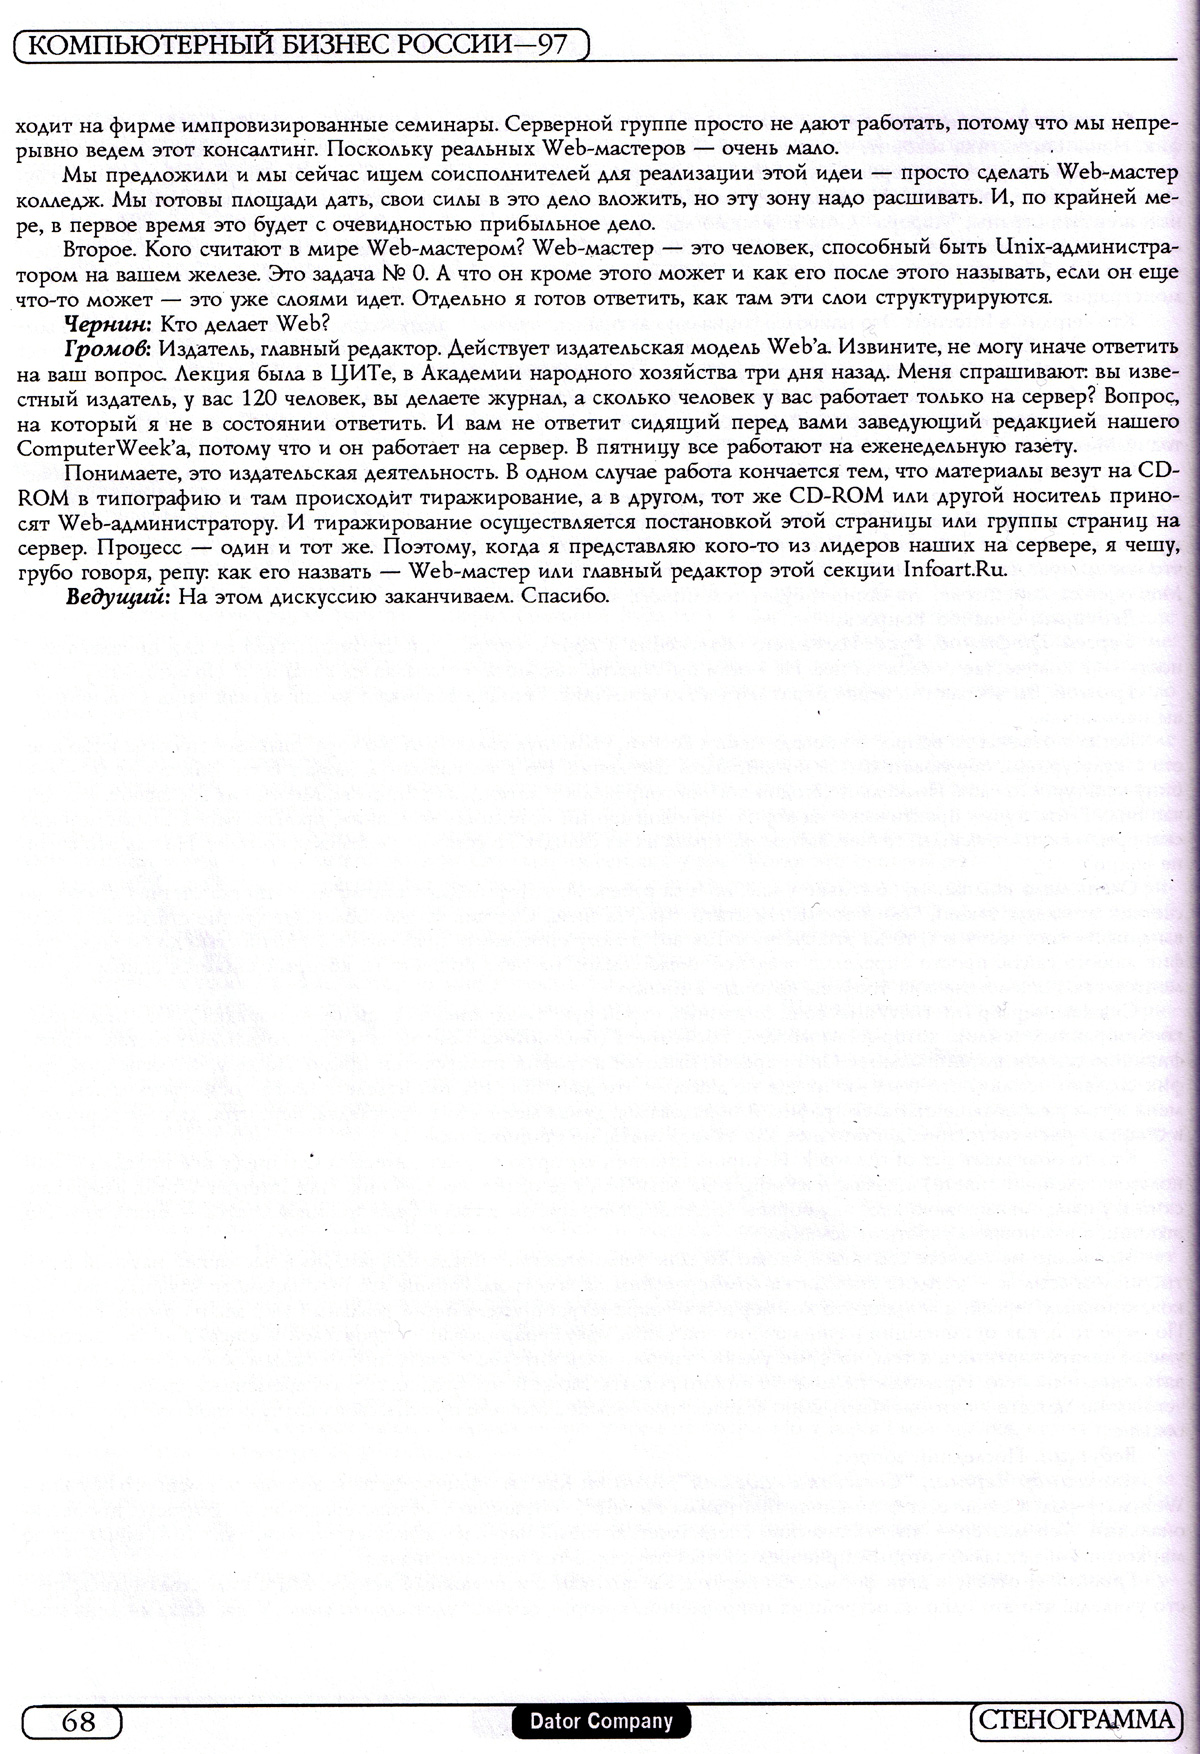 The Myths about Internet Business, By Gregory Gromov, Proceedings of the III National Conference of Computer Business in Russia, 1997, Moscow 